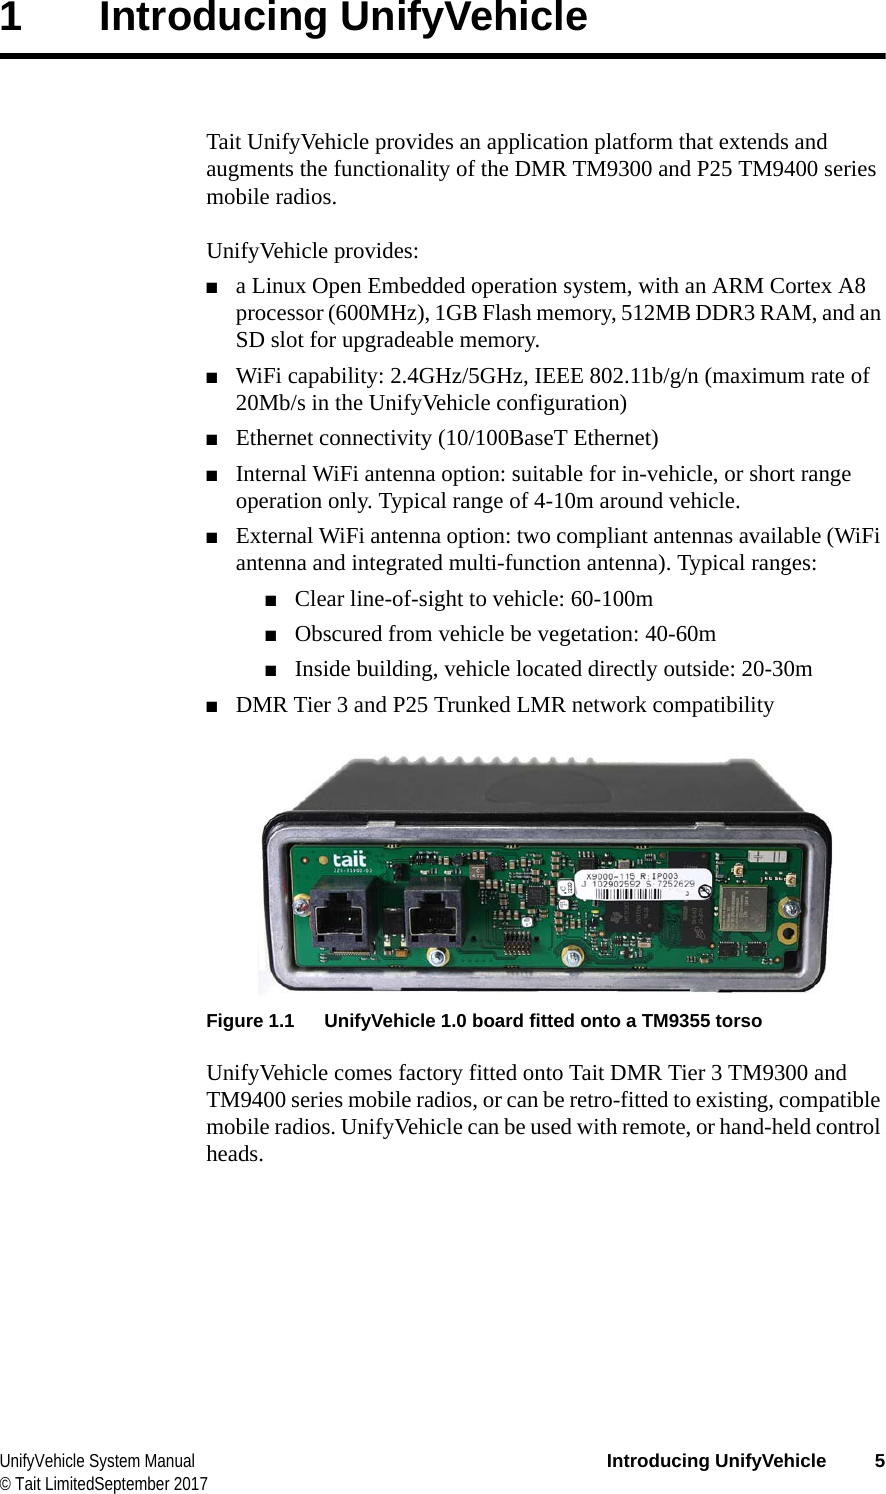  UnifyVehicle System Manual Introducing UnifyVehicle 5© Tait LimitedSeptember 20171 Introducing UnifyVehicleTait UnifyVehicle provides an application platform that extends and augments the functionality of the DMR TM9300 and P25 TM9400 series mobile radios.UnifyVehicle provides:■a Linux Open Embedded operation system, with an ARM Cortex A8 processor (600MHz), 1GB Flash memory, 512MB DDR3 RAM, and an SD slot for upgradeable memory.■WiFi capability: 2.4GHz/5GHz, IEEE 802.11b/g/n (maximum rate of 20Mb/s in the UnifyVehicle configuration)■Ethernet connectivity (10/100BaseT Ethernet)■Internal WiFi antenna option: suitable for in-vehicle, or short range operation only. Typical range of 4-10m around vehicle.■External WiFi antenna option: two compliant antennas available (WiFi antenna and integrated multi-function antenna). Typical ranges:■Clear line-of-sight to vehicle: 60-100m■Obscured from vehicle be vegetation: 40-60m■Inside building, vehicle located directly outside: 20-30m■DMR Tier 3 and P25 Trunked LMR network compatibilityFigure 1.1 UnifyVehicle 1.0 board fitted onto a TM9355 torsoUnifyVehicle comes factory fitted onto Tait DMR Tier 3 TM9300 and TM9400 series mobile radios, or can be retro-fitted to existing, compatible mobile radios. UnifyVehicle can be used with remote, or hand-held control heads.